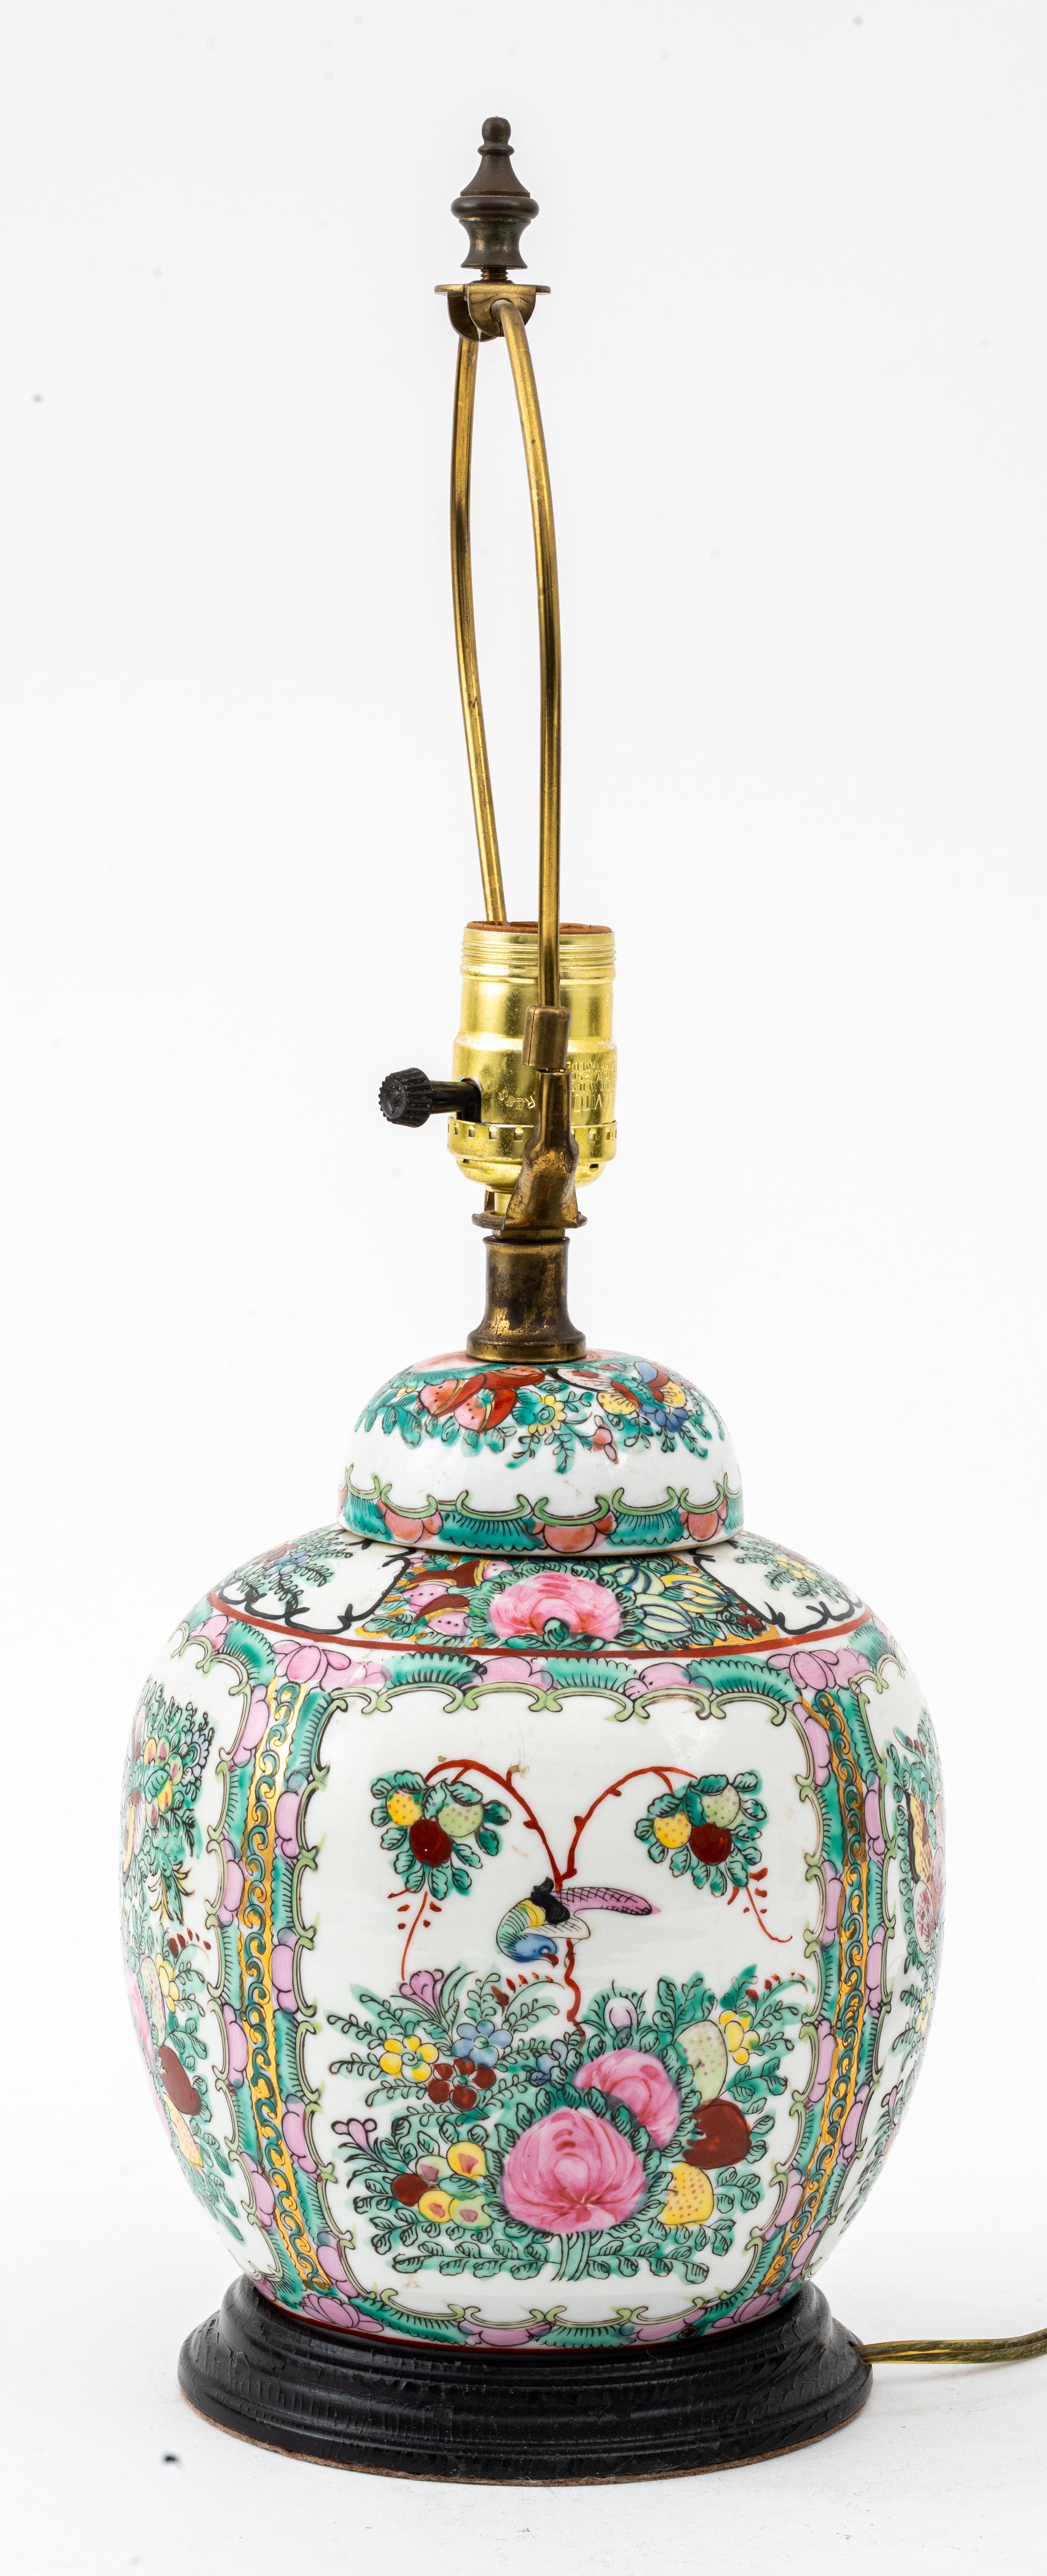 Chinese porcelain famille rose ginger jar lamp, with motifs of butterflies and birds, on wooden base. Measures: 18.5